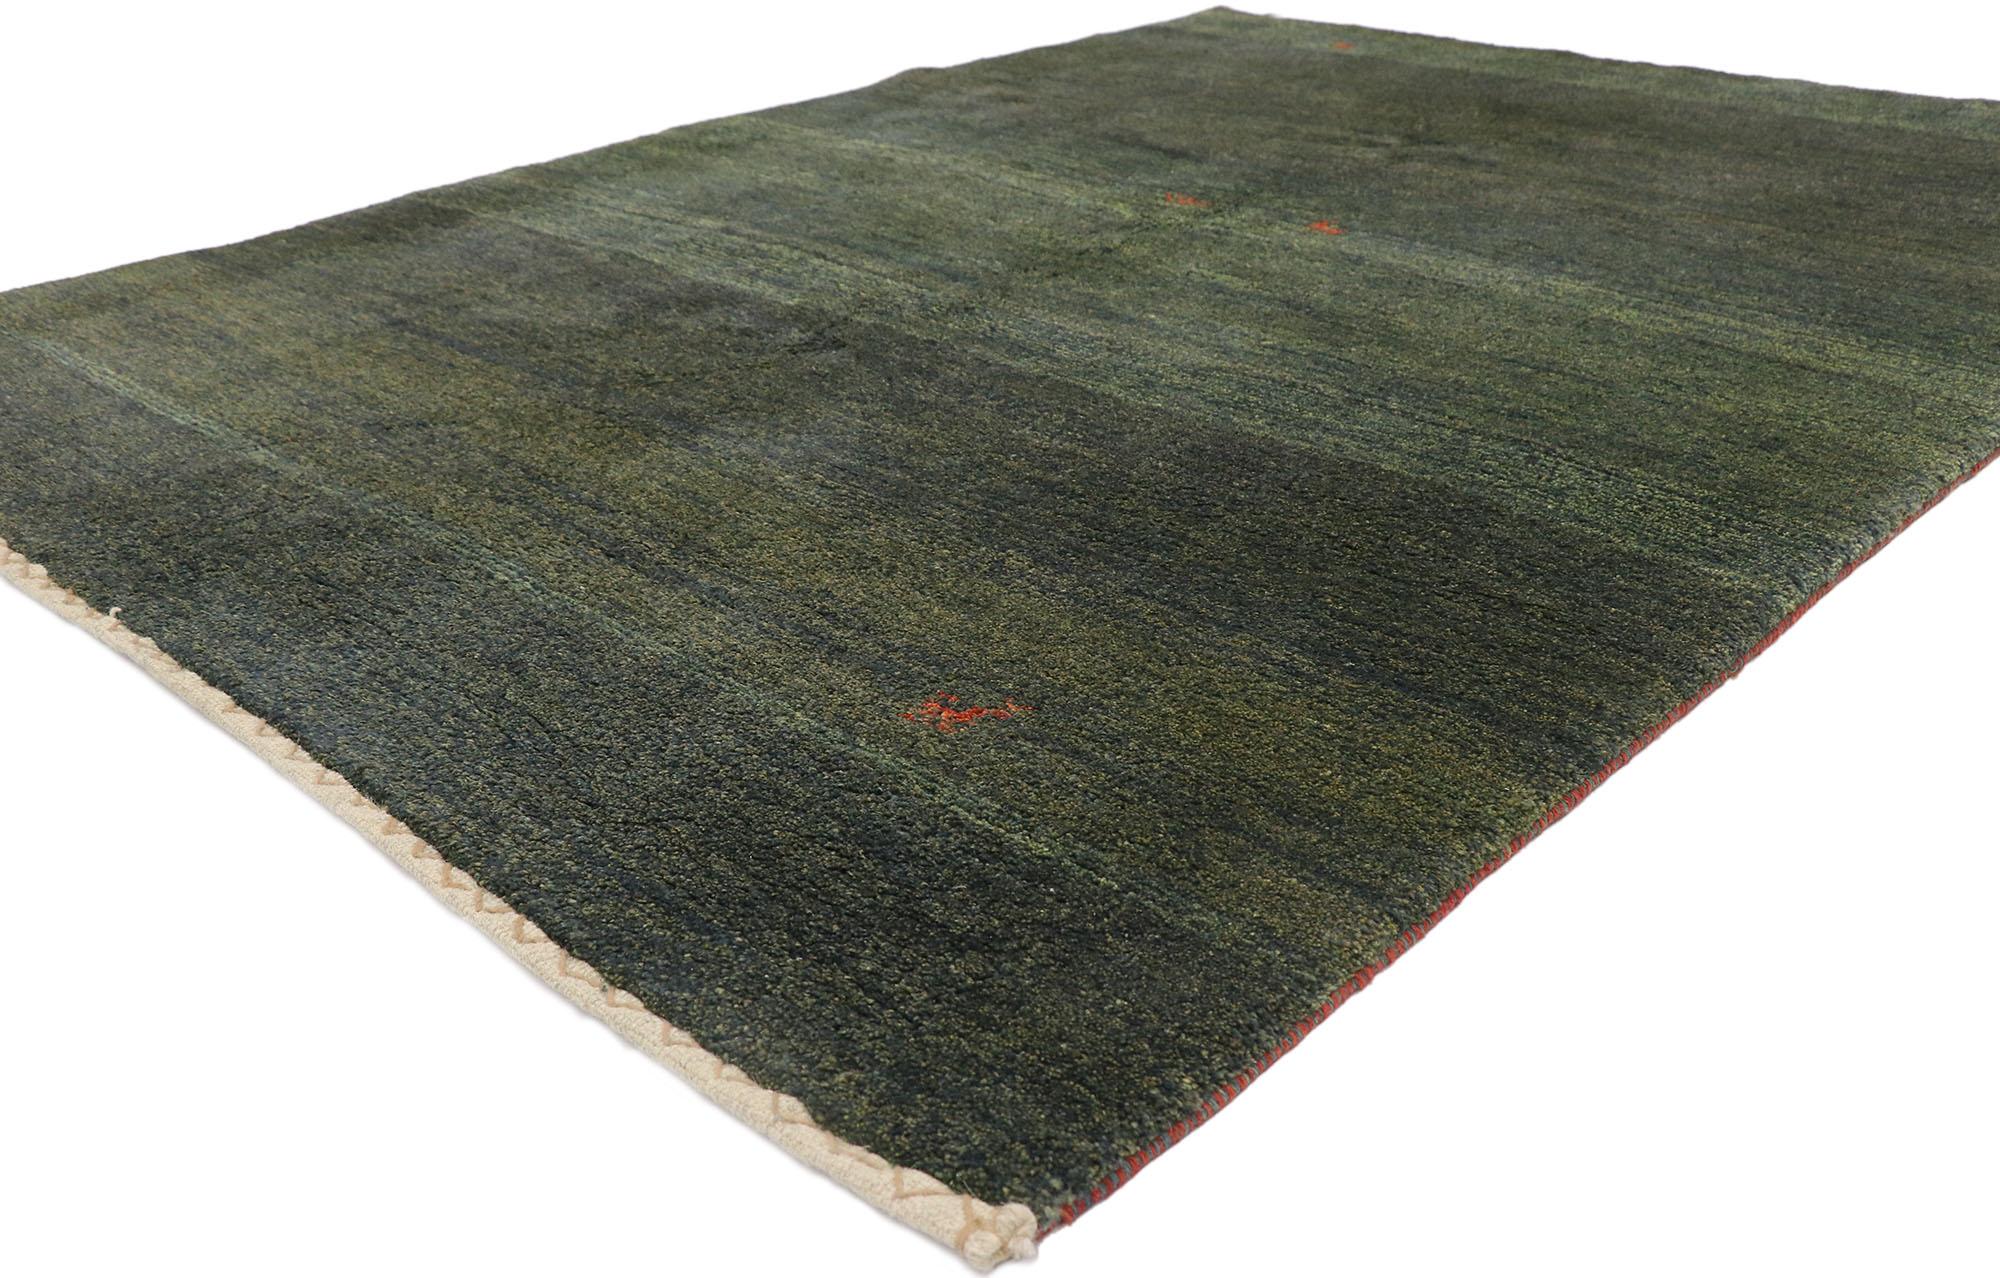 78040 Vintage Persian Green Moss Gabbeh rug with Biophilic Design 05'11 x 08'01. With its simplicity, modern biophilic design and reflecting elements of nature, this hand-knotted vintage Persian Gabbeh rug is a captivating vision of woven beauty.